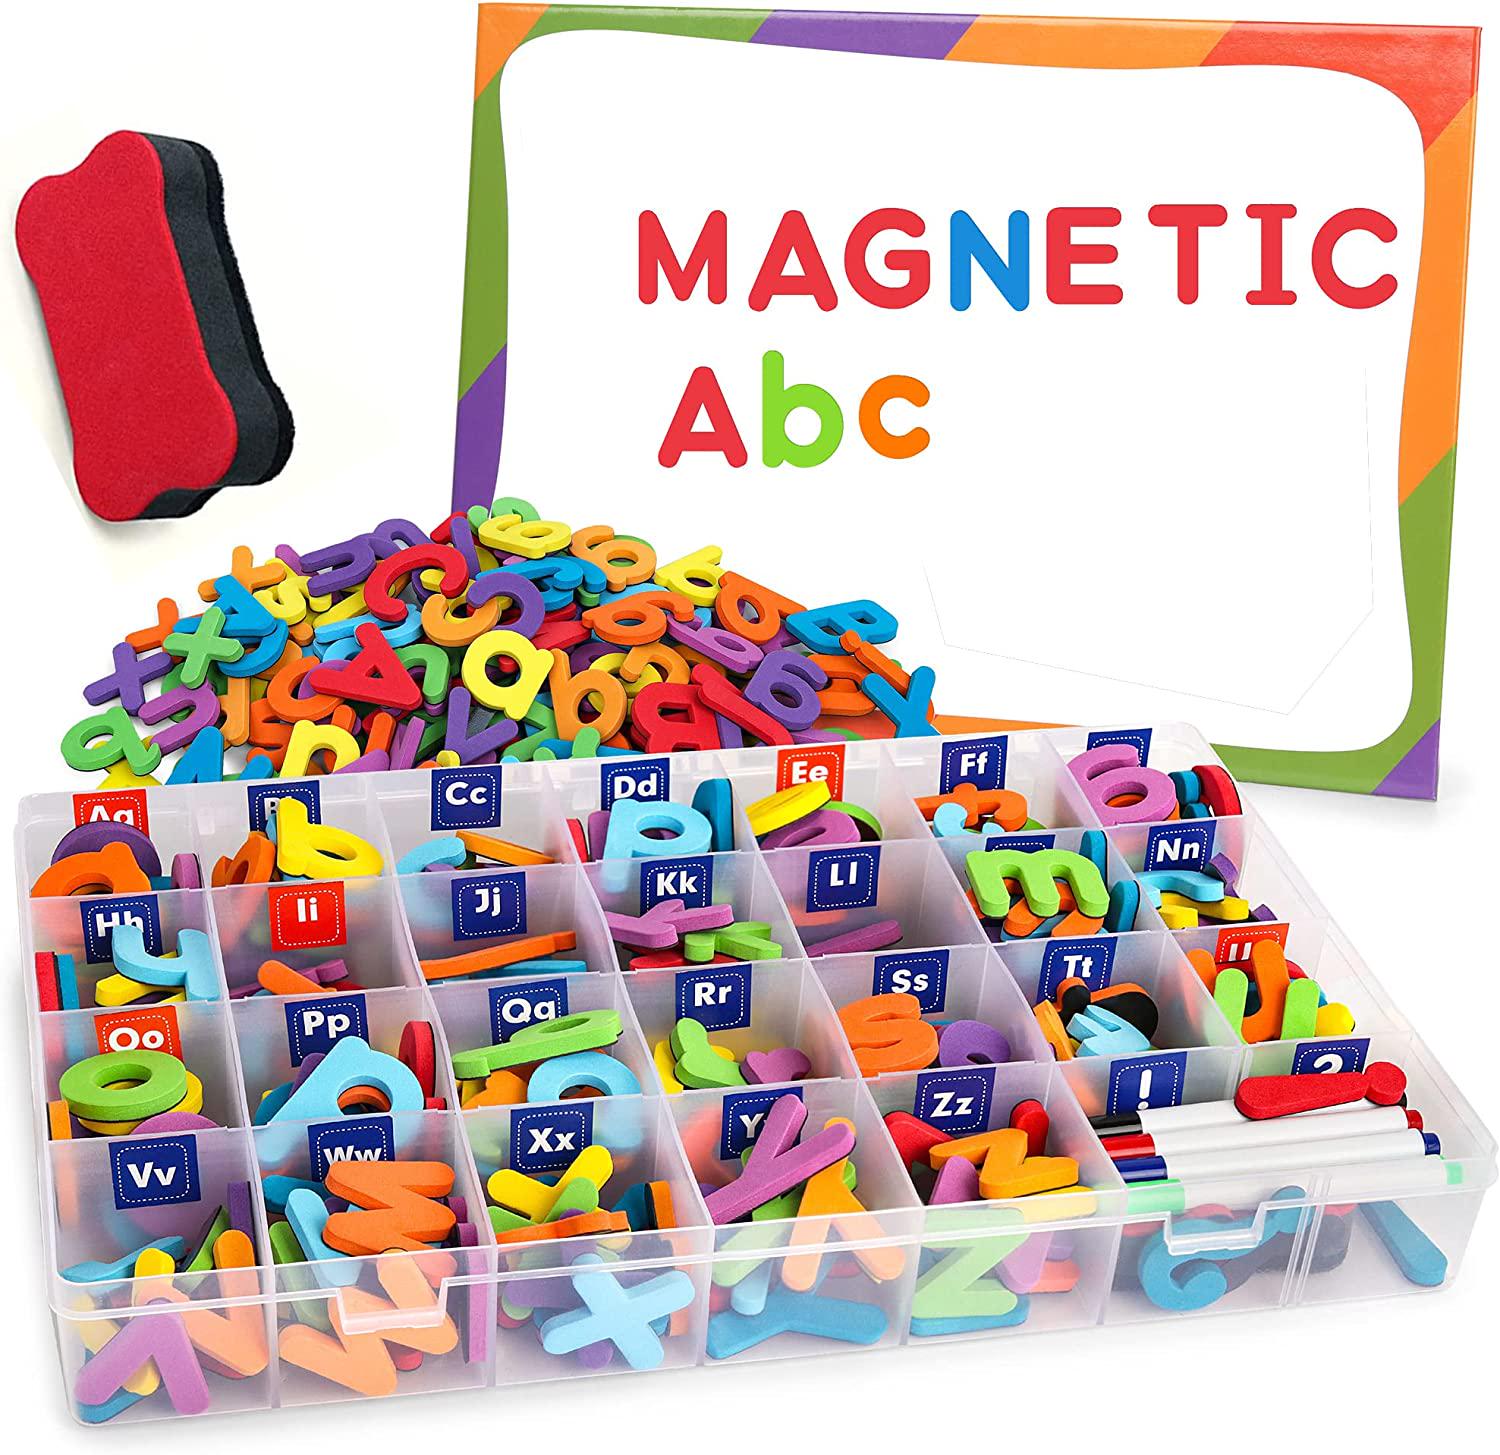 Dnvkict, Magnetic Letters 234 Pcs , Uppercase Lowercase Foam Alphabet ABC Fridge Magnets, Educational Toy Set for Classroom Kids Learning Spelling with Magnetic Board and Storage Box